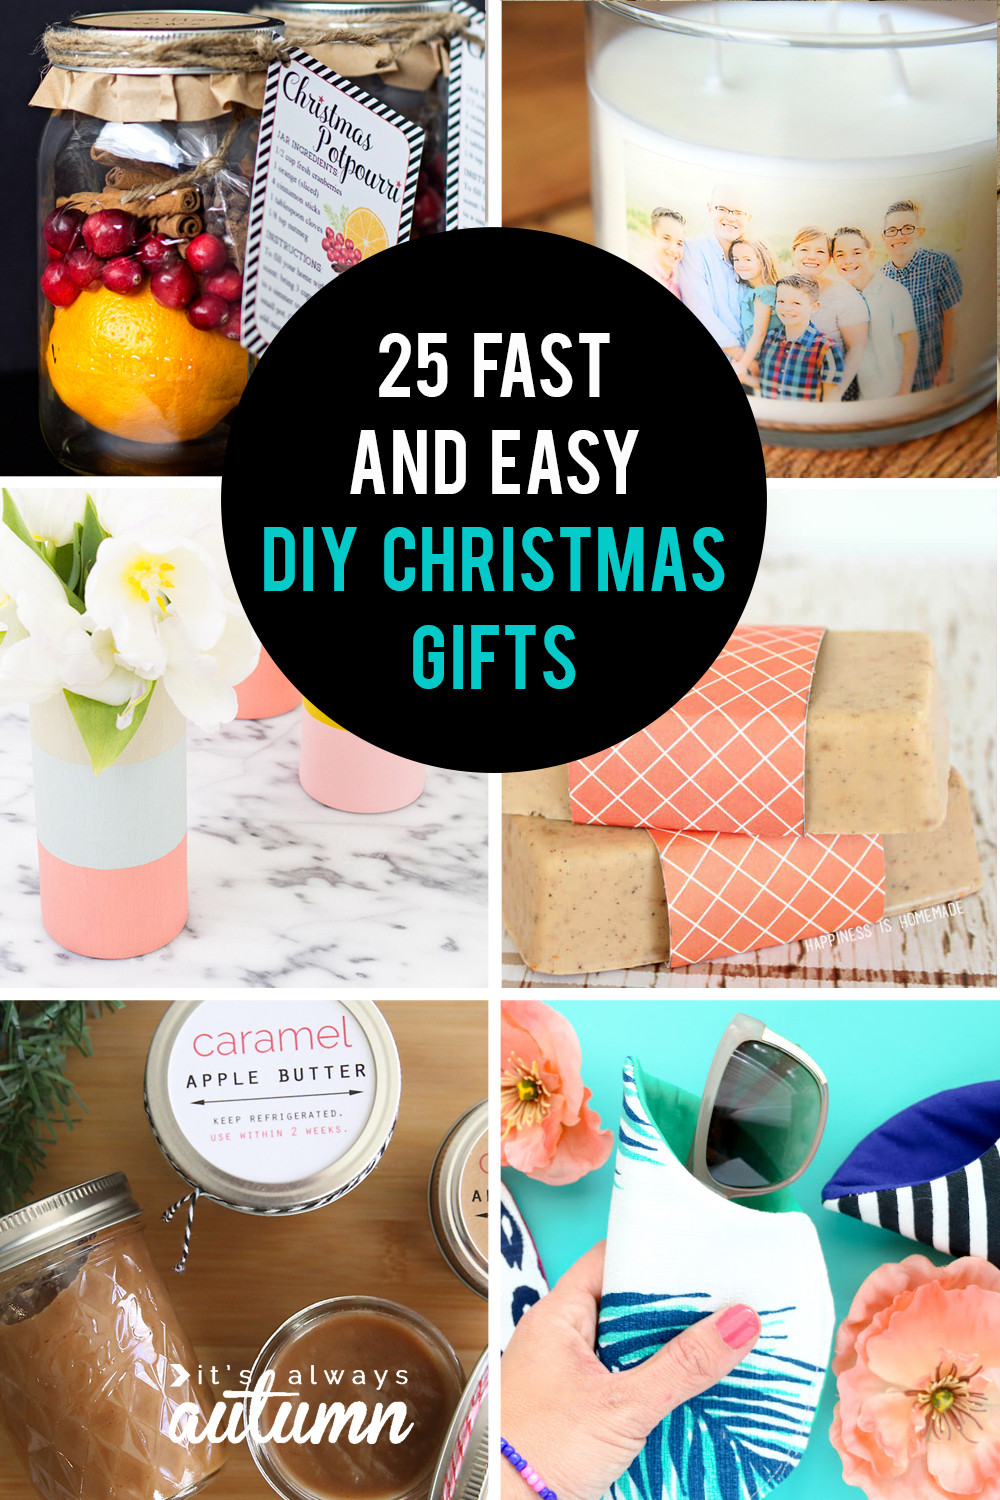 DIY Gifts For Christmas
 25 easy homemade Christmas ts you can make in 15